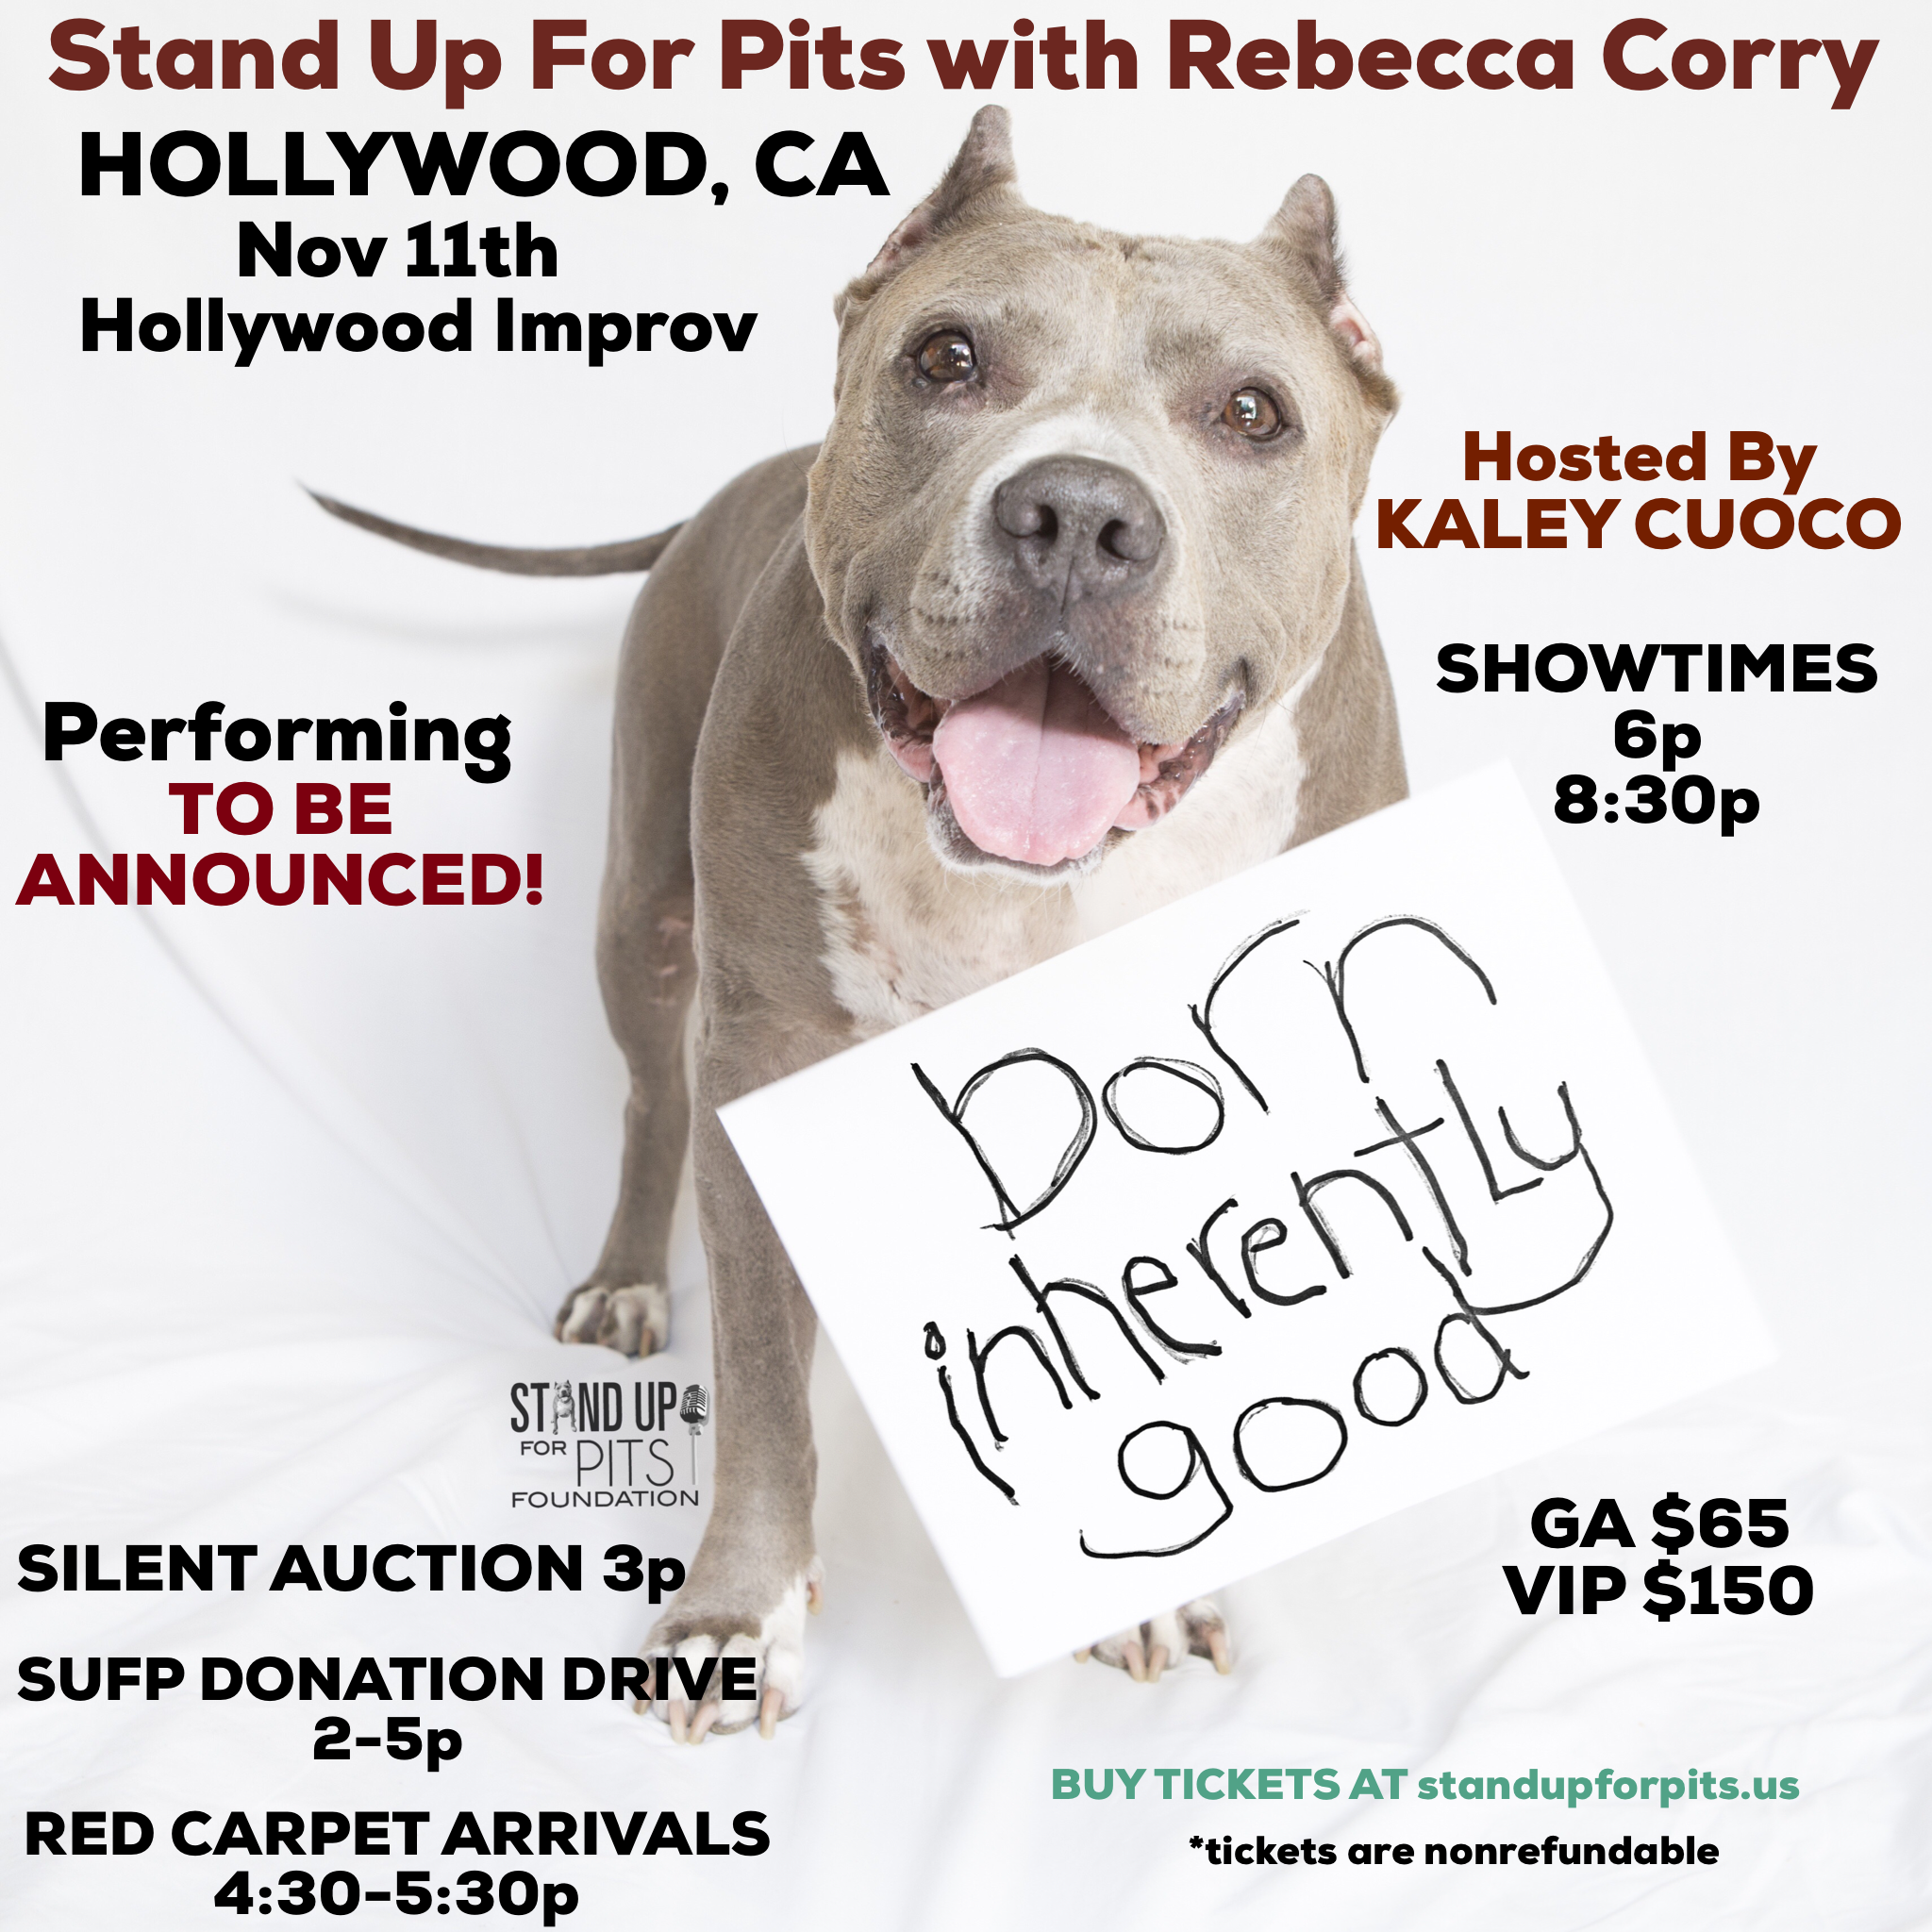 TICKETS for Stand Up For Pits HOLLYWOOD on sale TOMORROW!!!!